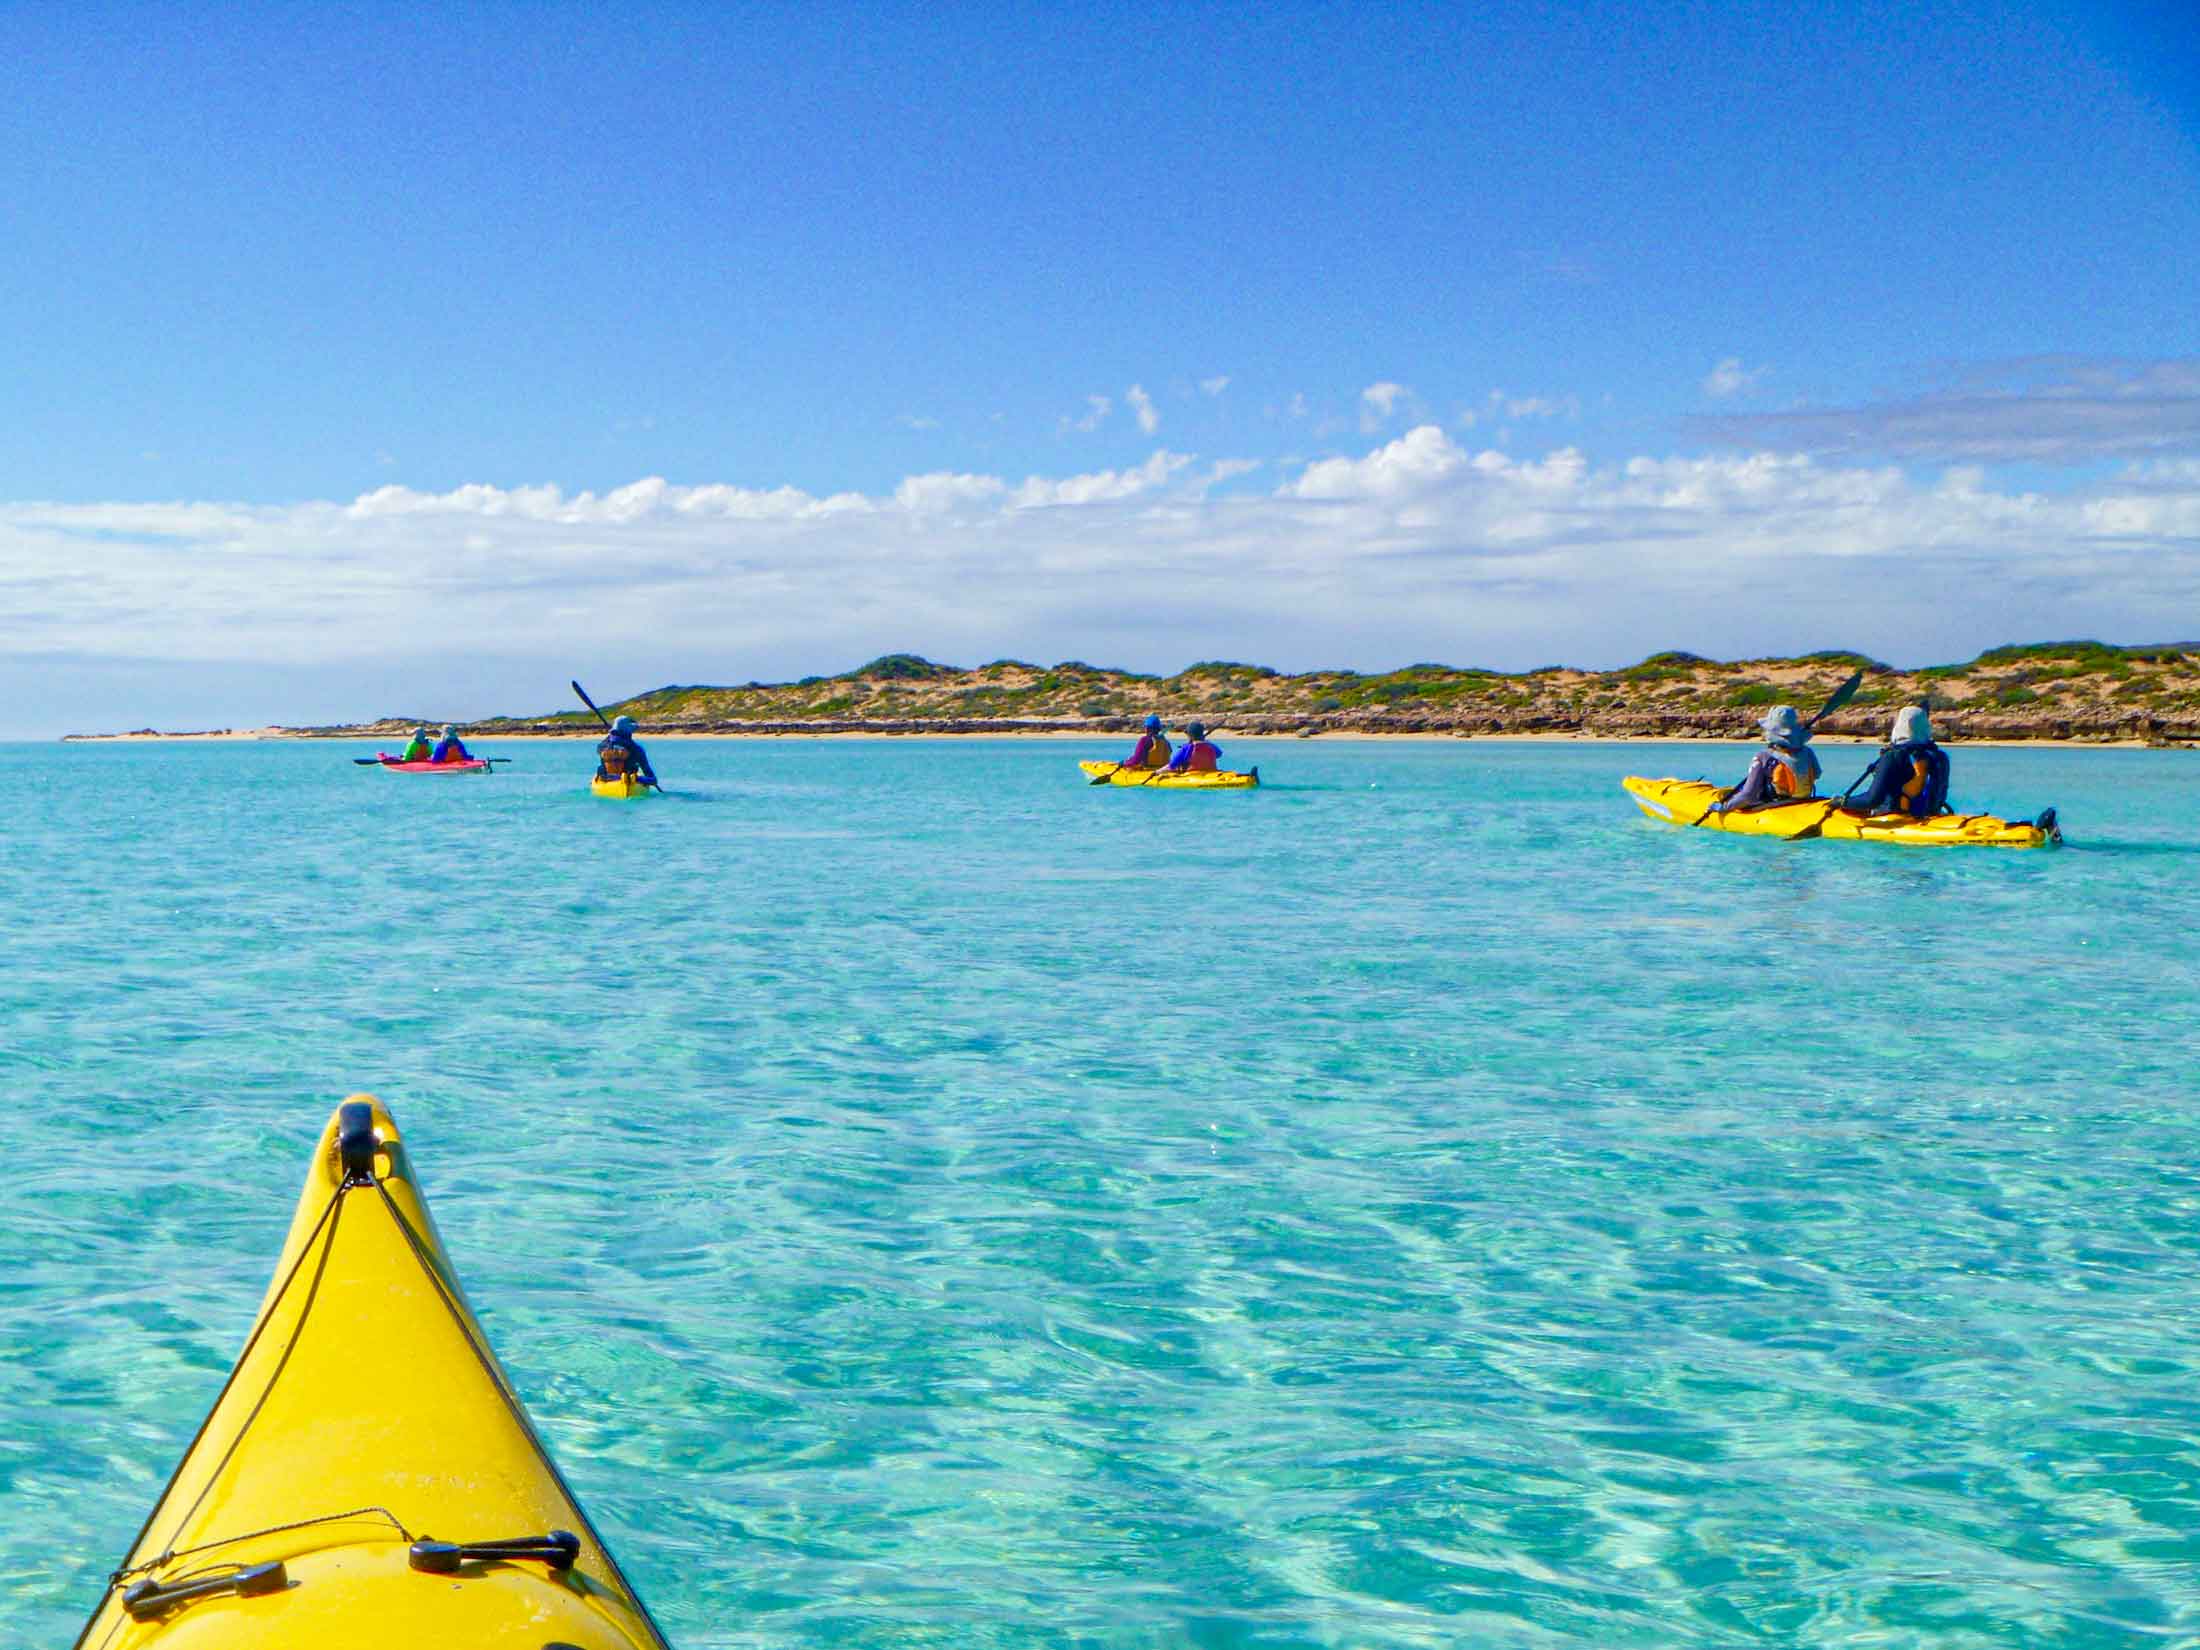 Overnight Tours Ningaloo Reef, sea kayaking, snorkelling and camping multi day tours Exmouth